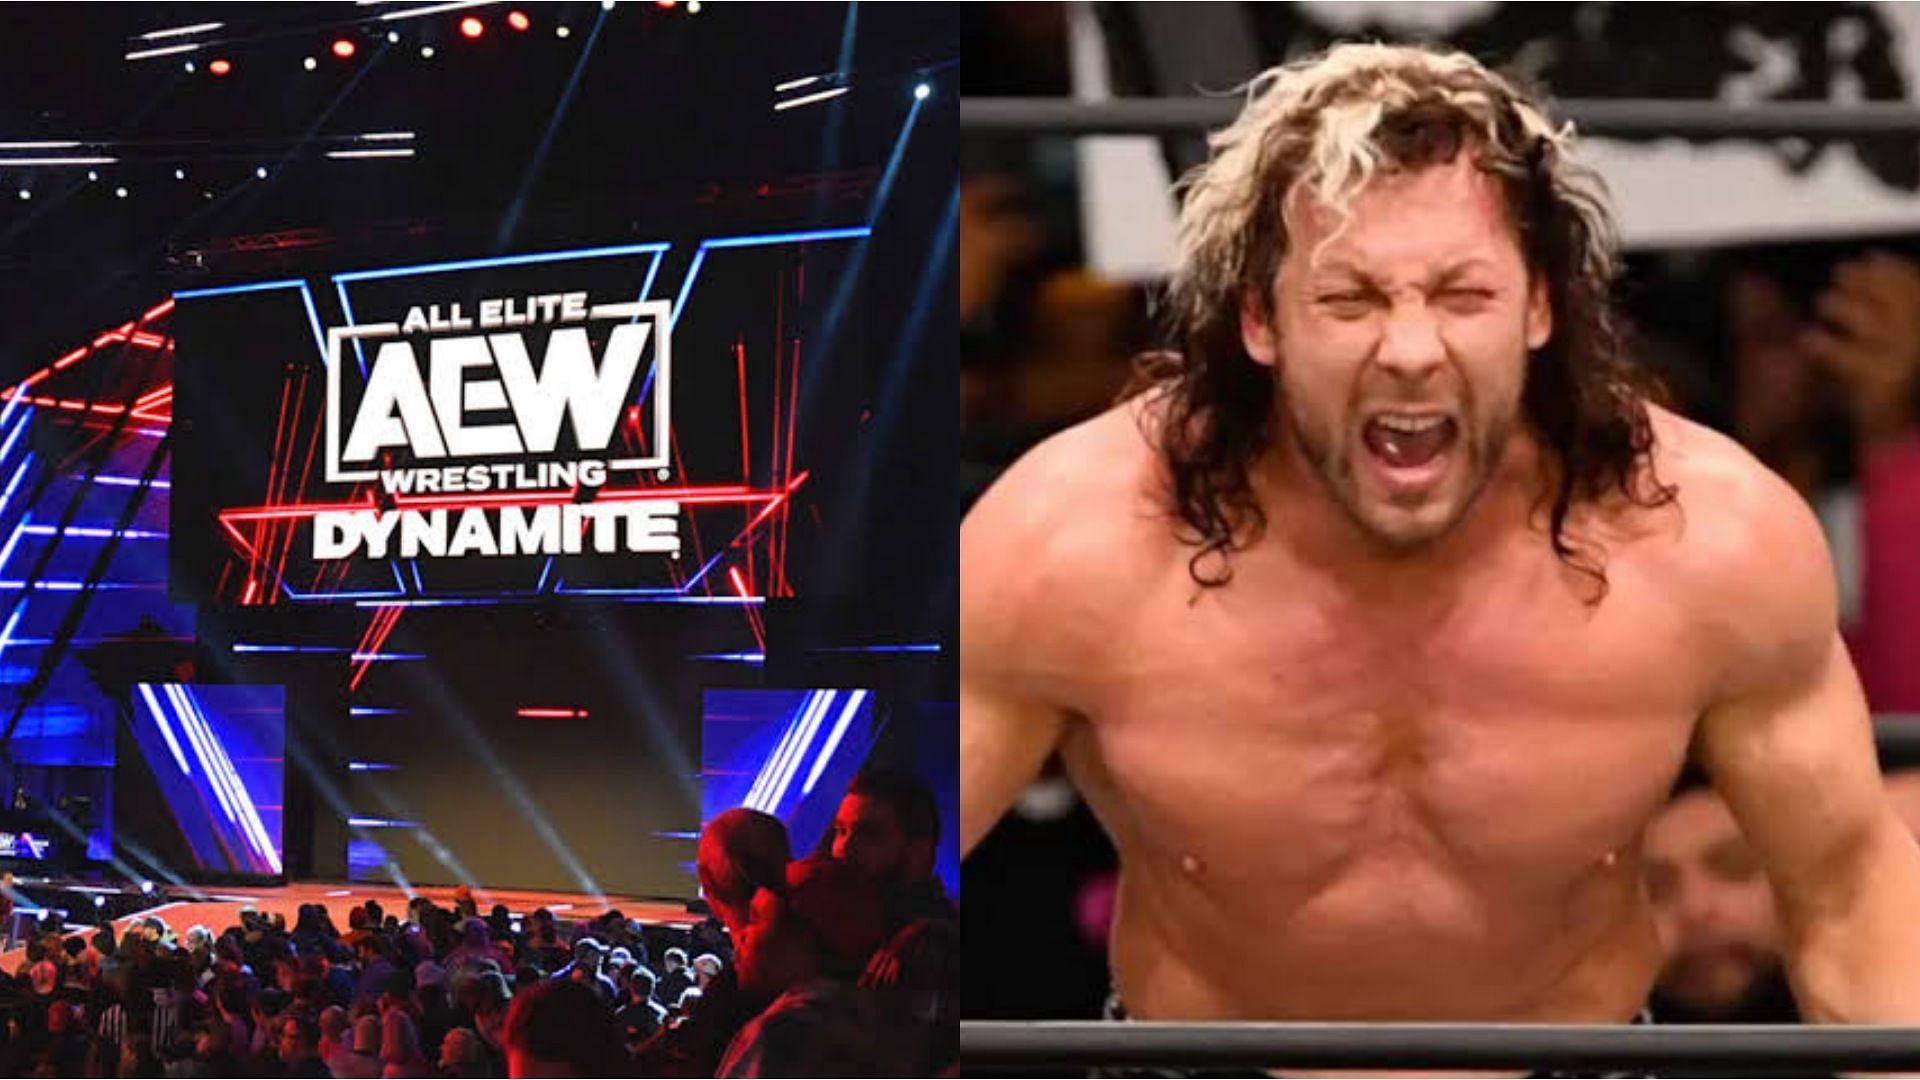 Kenny Omega has wrestled multiple high-profile matches in AEW